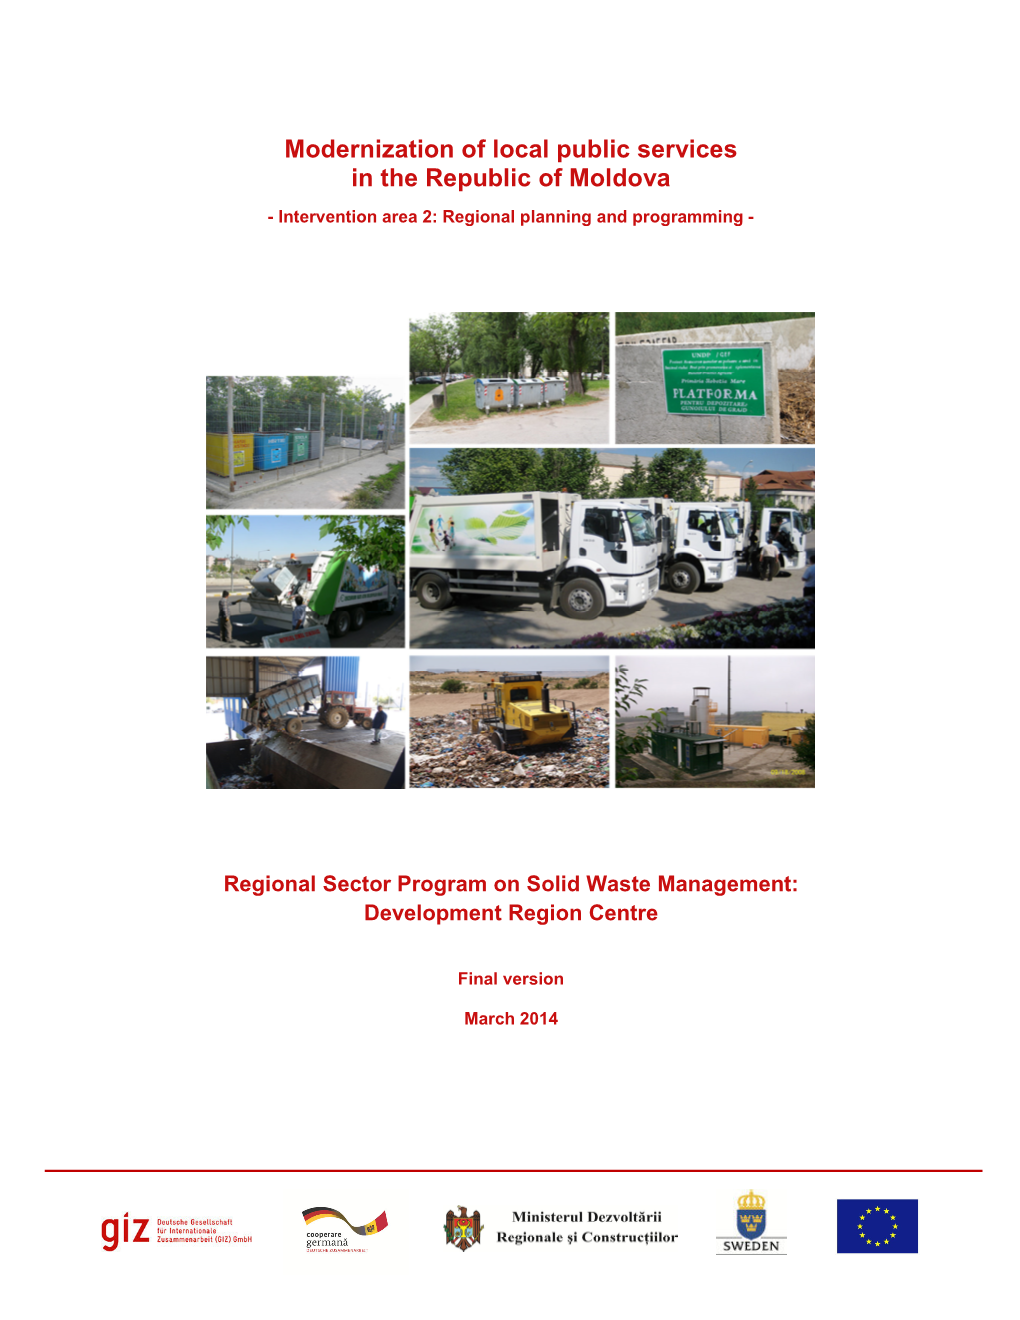 Modernization of Local Public Services in the Republic of Moldova - Intervention Area 2: Regional Planning and Programming